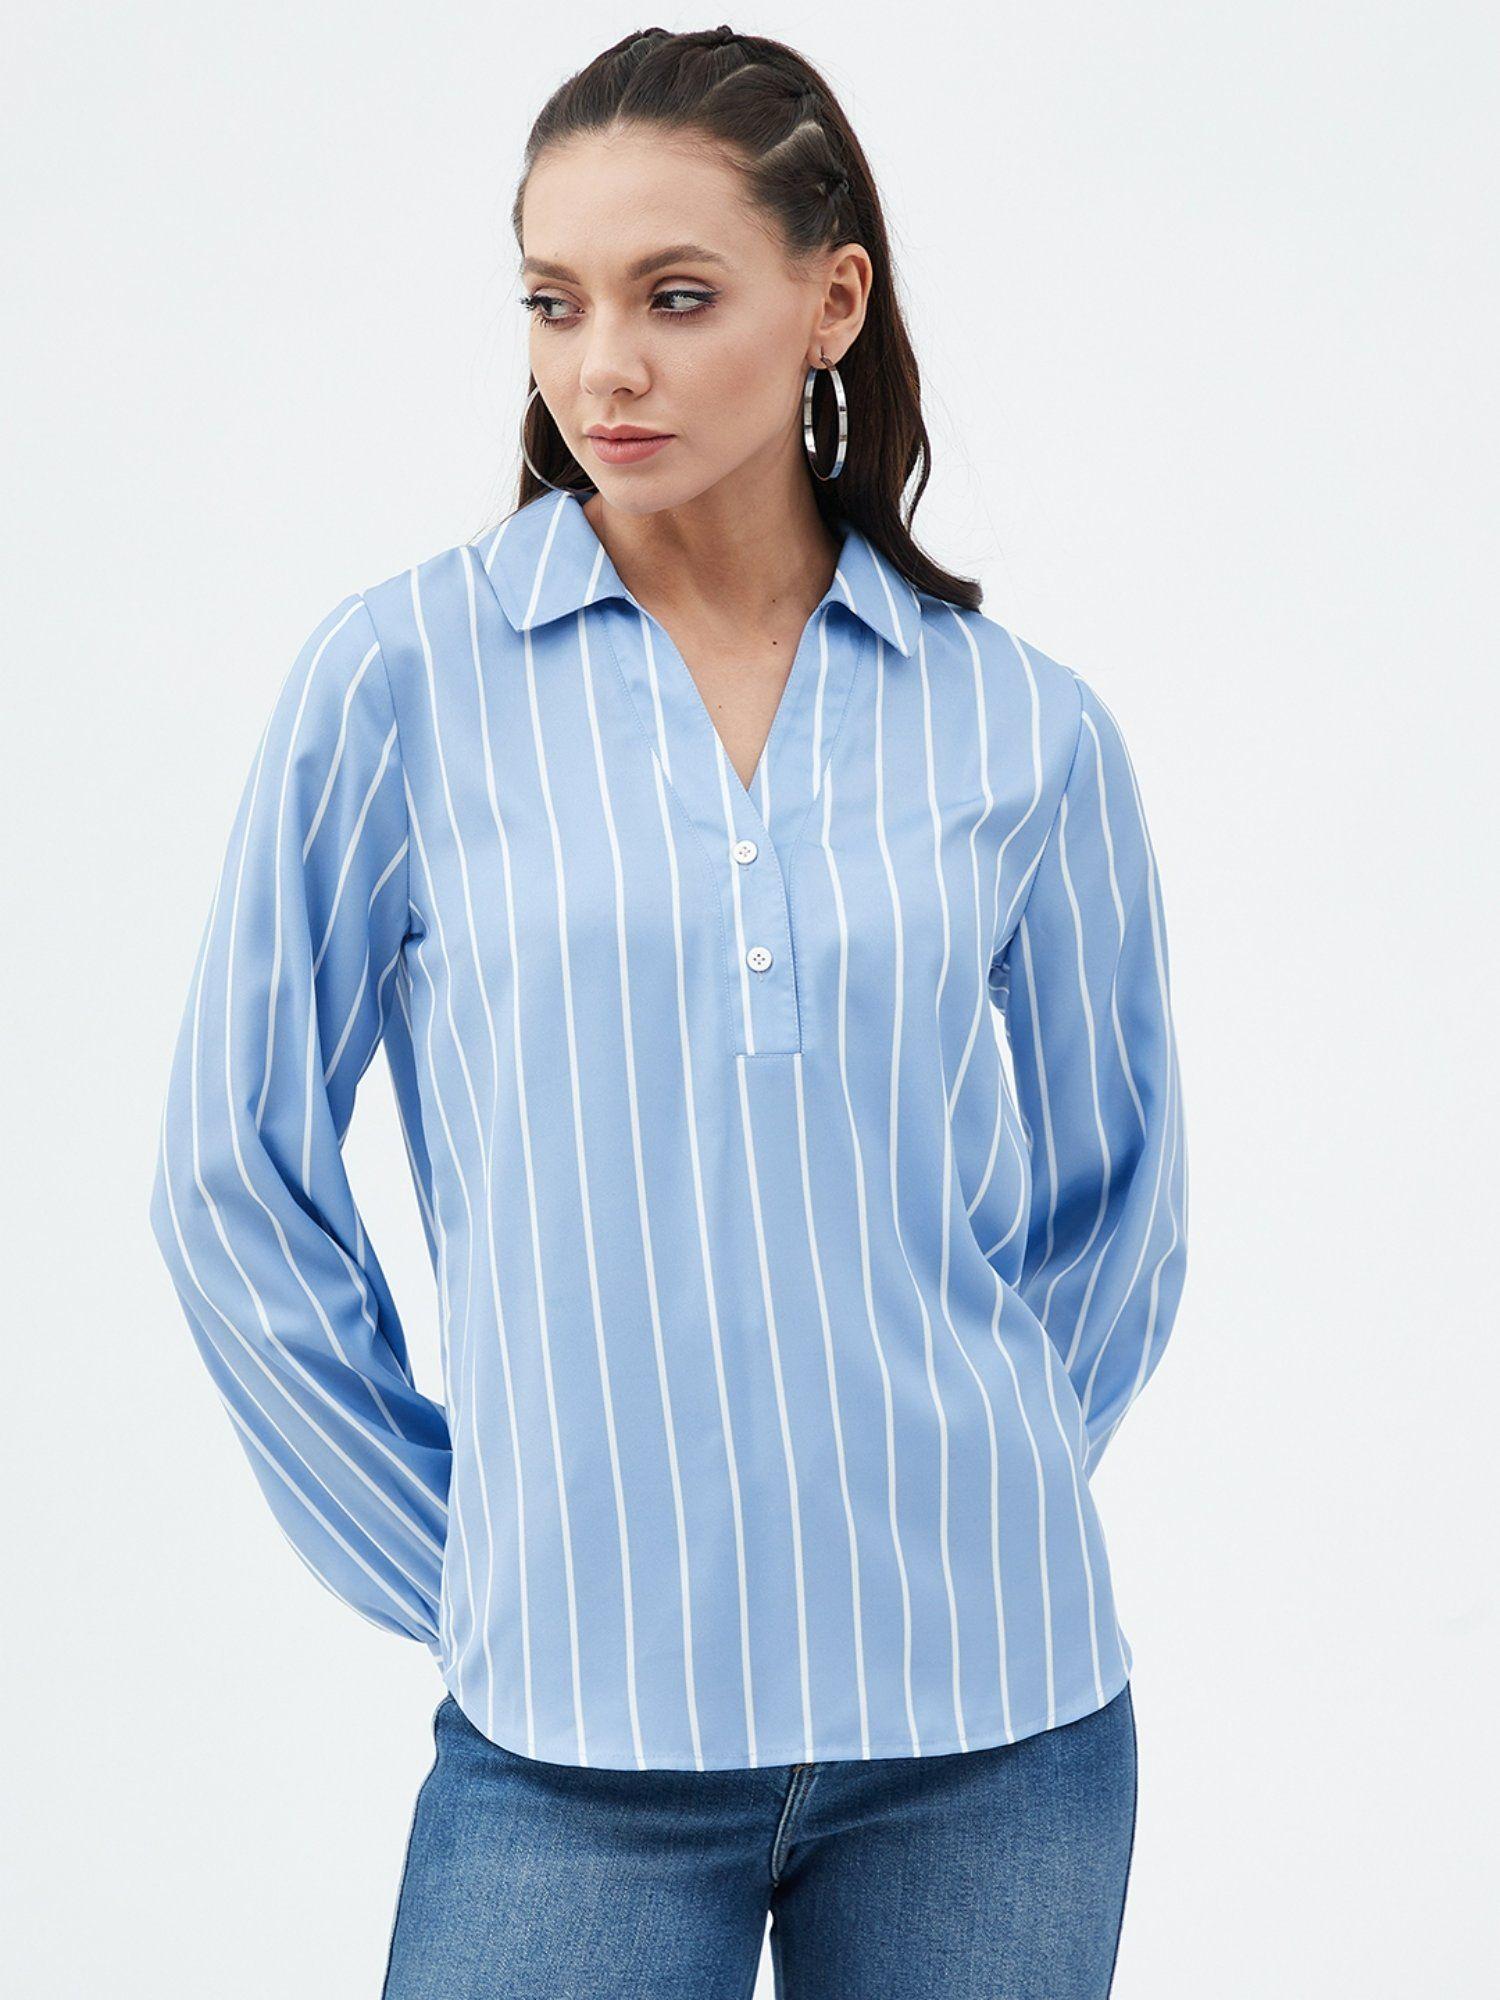 sky blue collar neck shirt style striped top